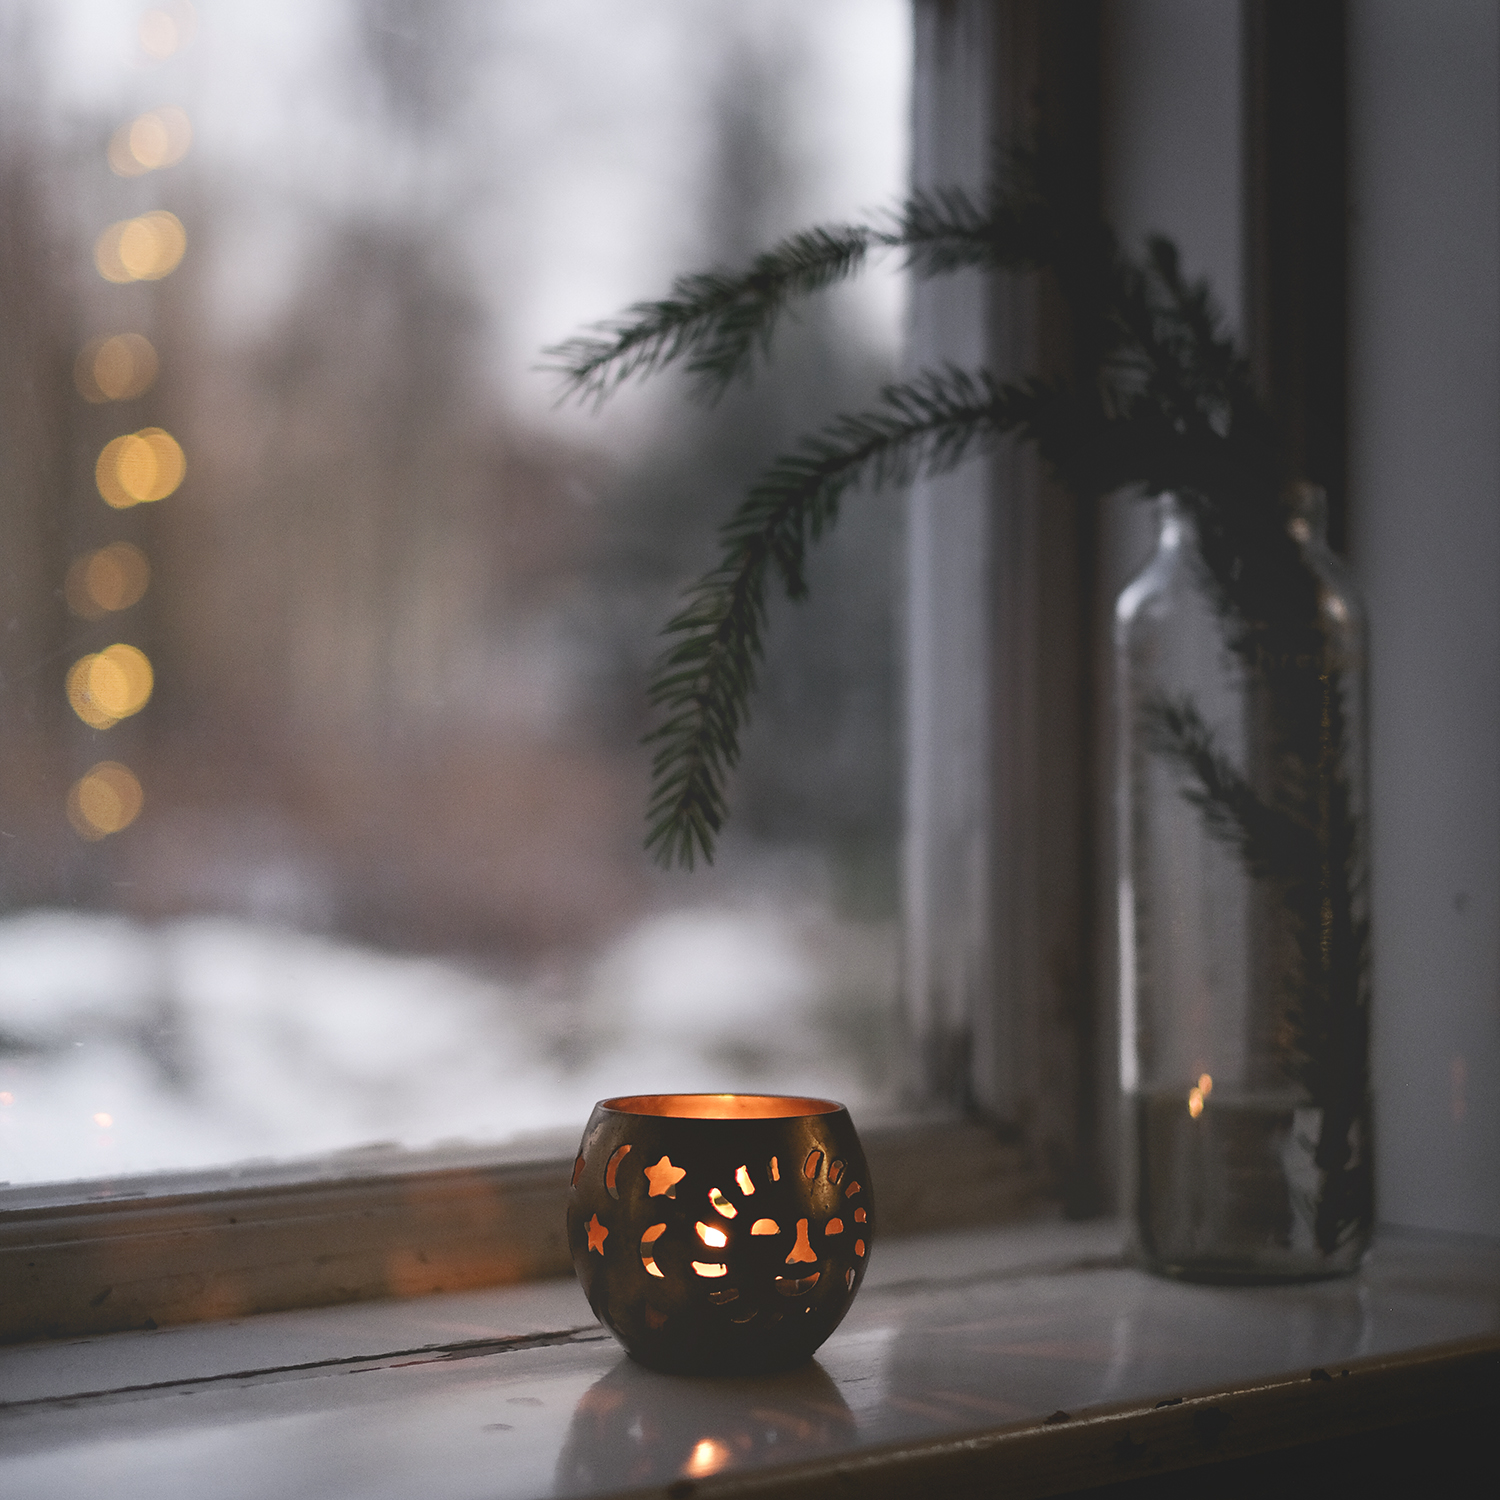 Scandi Christmas holidays, window with candle and snow outside. www.Fenne.be